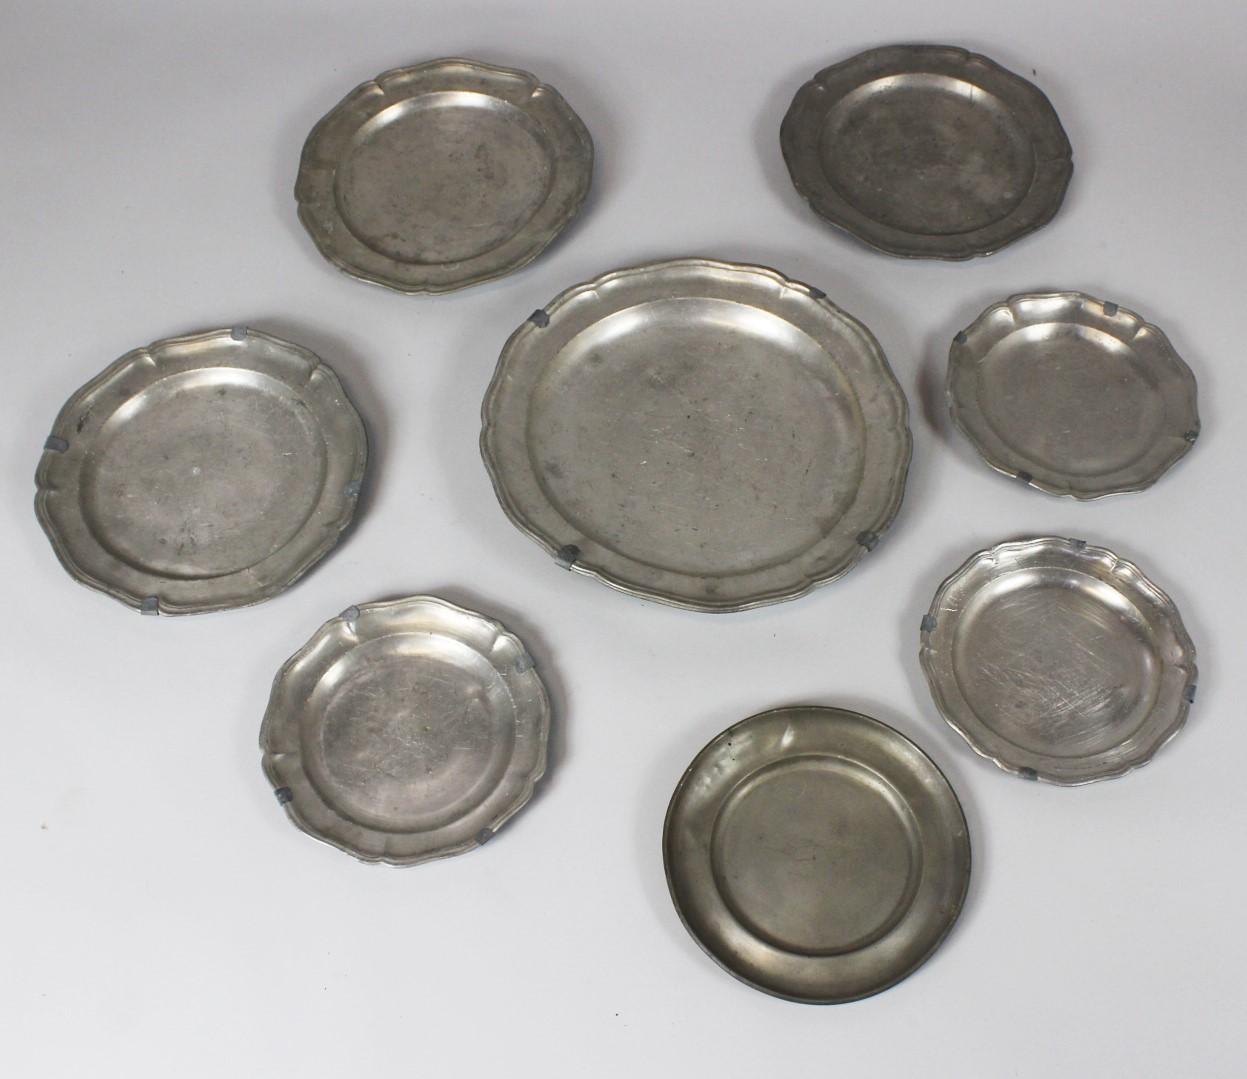 Set of eight pewter plates from the 18th century. They are in original condition with patina.

Dimensions:
1x diameter 37cm/14,6´´
3x diameter 29cm/11,4´´
4x diameter 24cm/9,4´´.